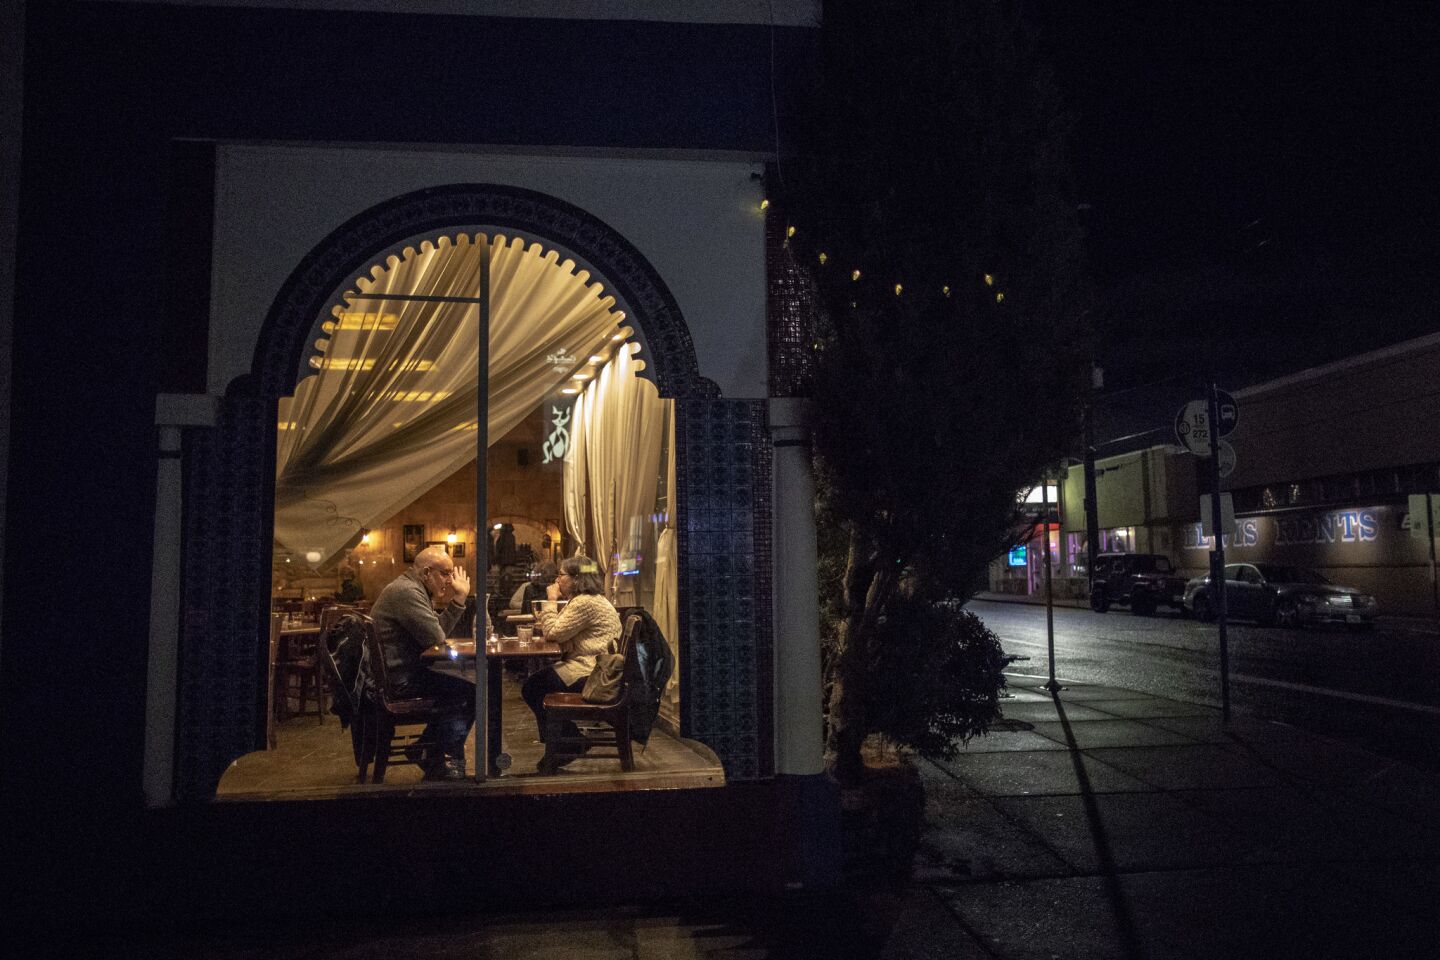 Diners sit at a table in an upscale restaurant on Stark Street in the Montavilla neighborhood in Portland, Ore.